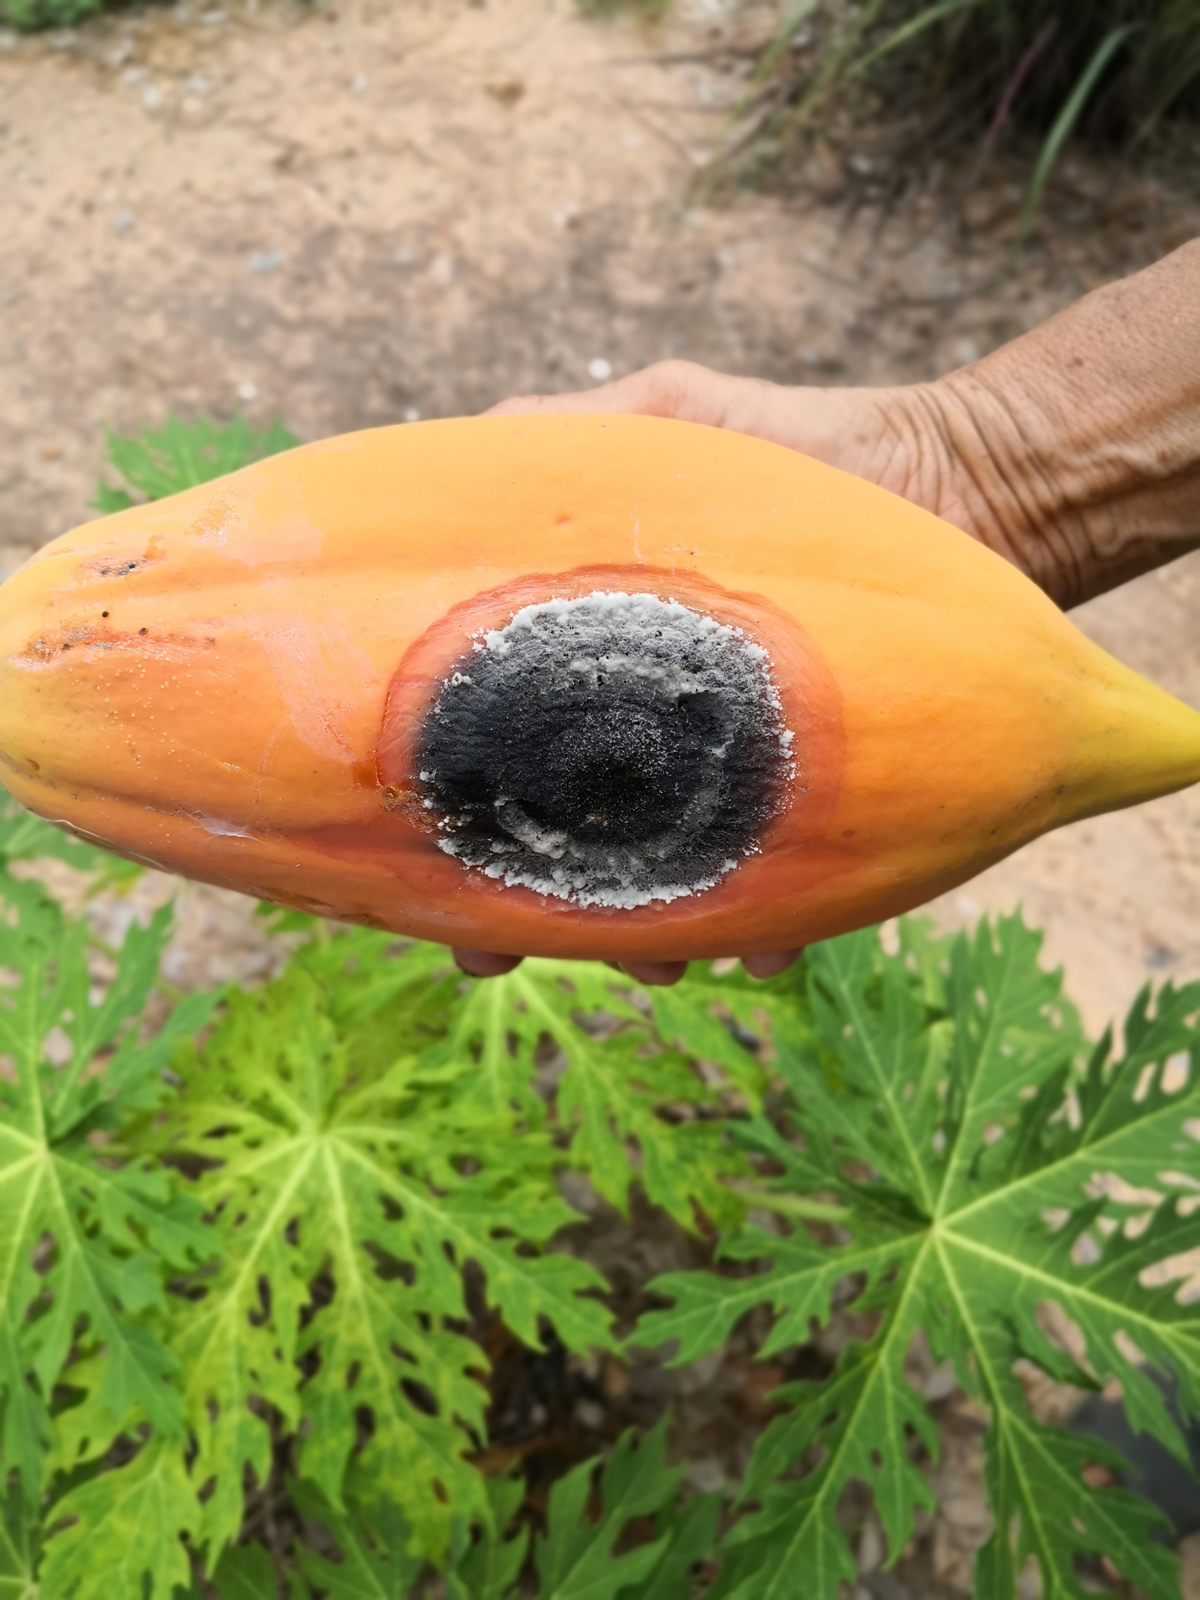 Papaya fungal disease picture of hand holding orange ripe papaya with dark circle scars with fungal spores causing rotten fruit. The background image is a papaya tree with green leaves.